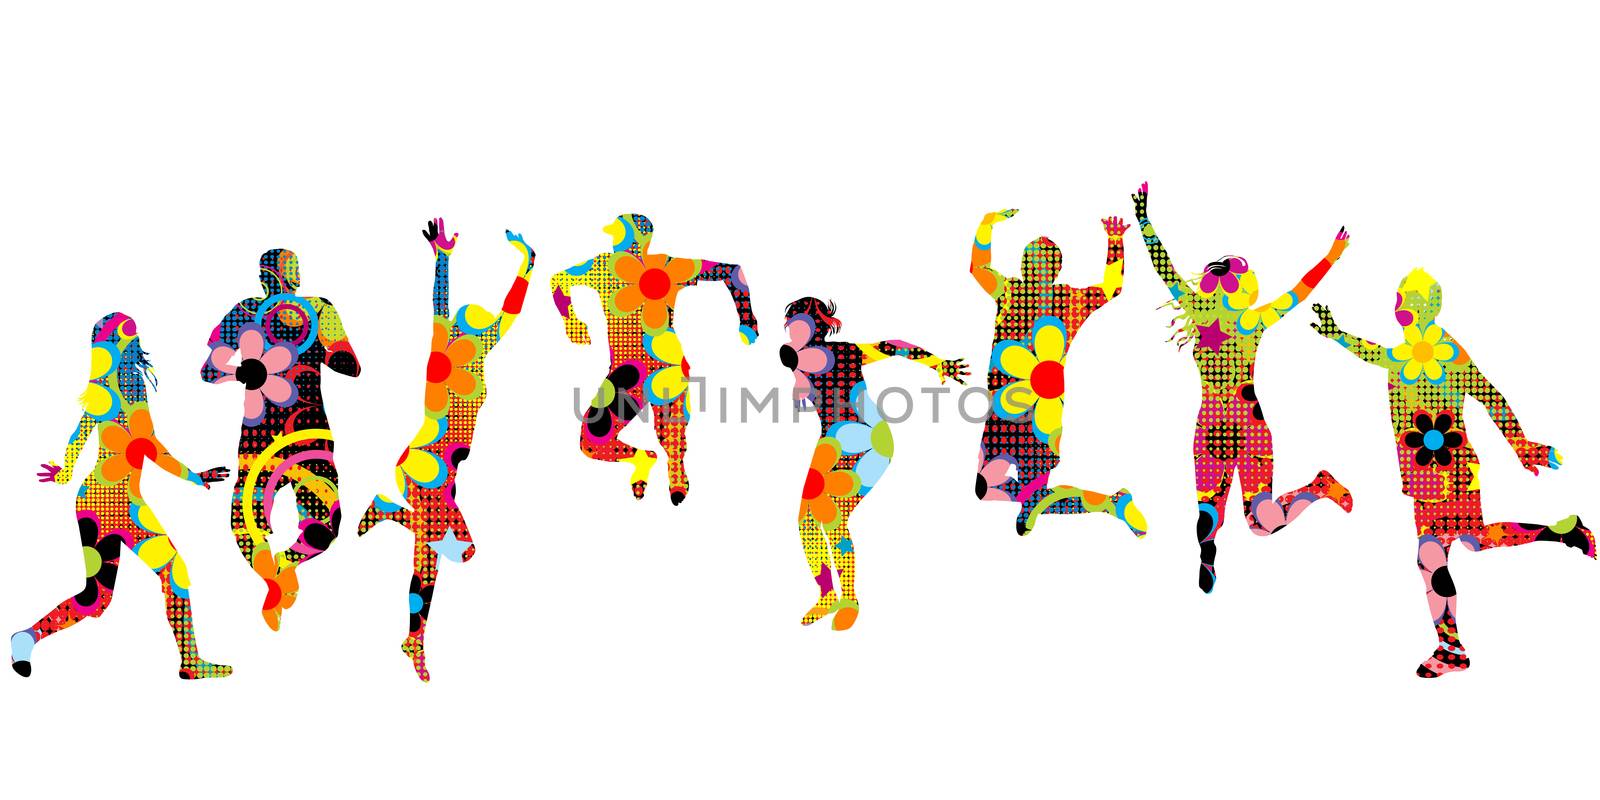 Floral patterned silhouettes of women and men jumping by hibrida13